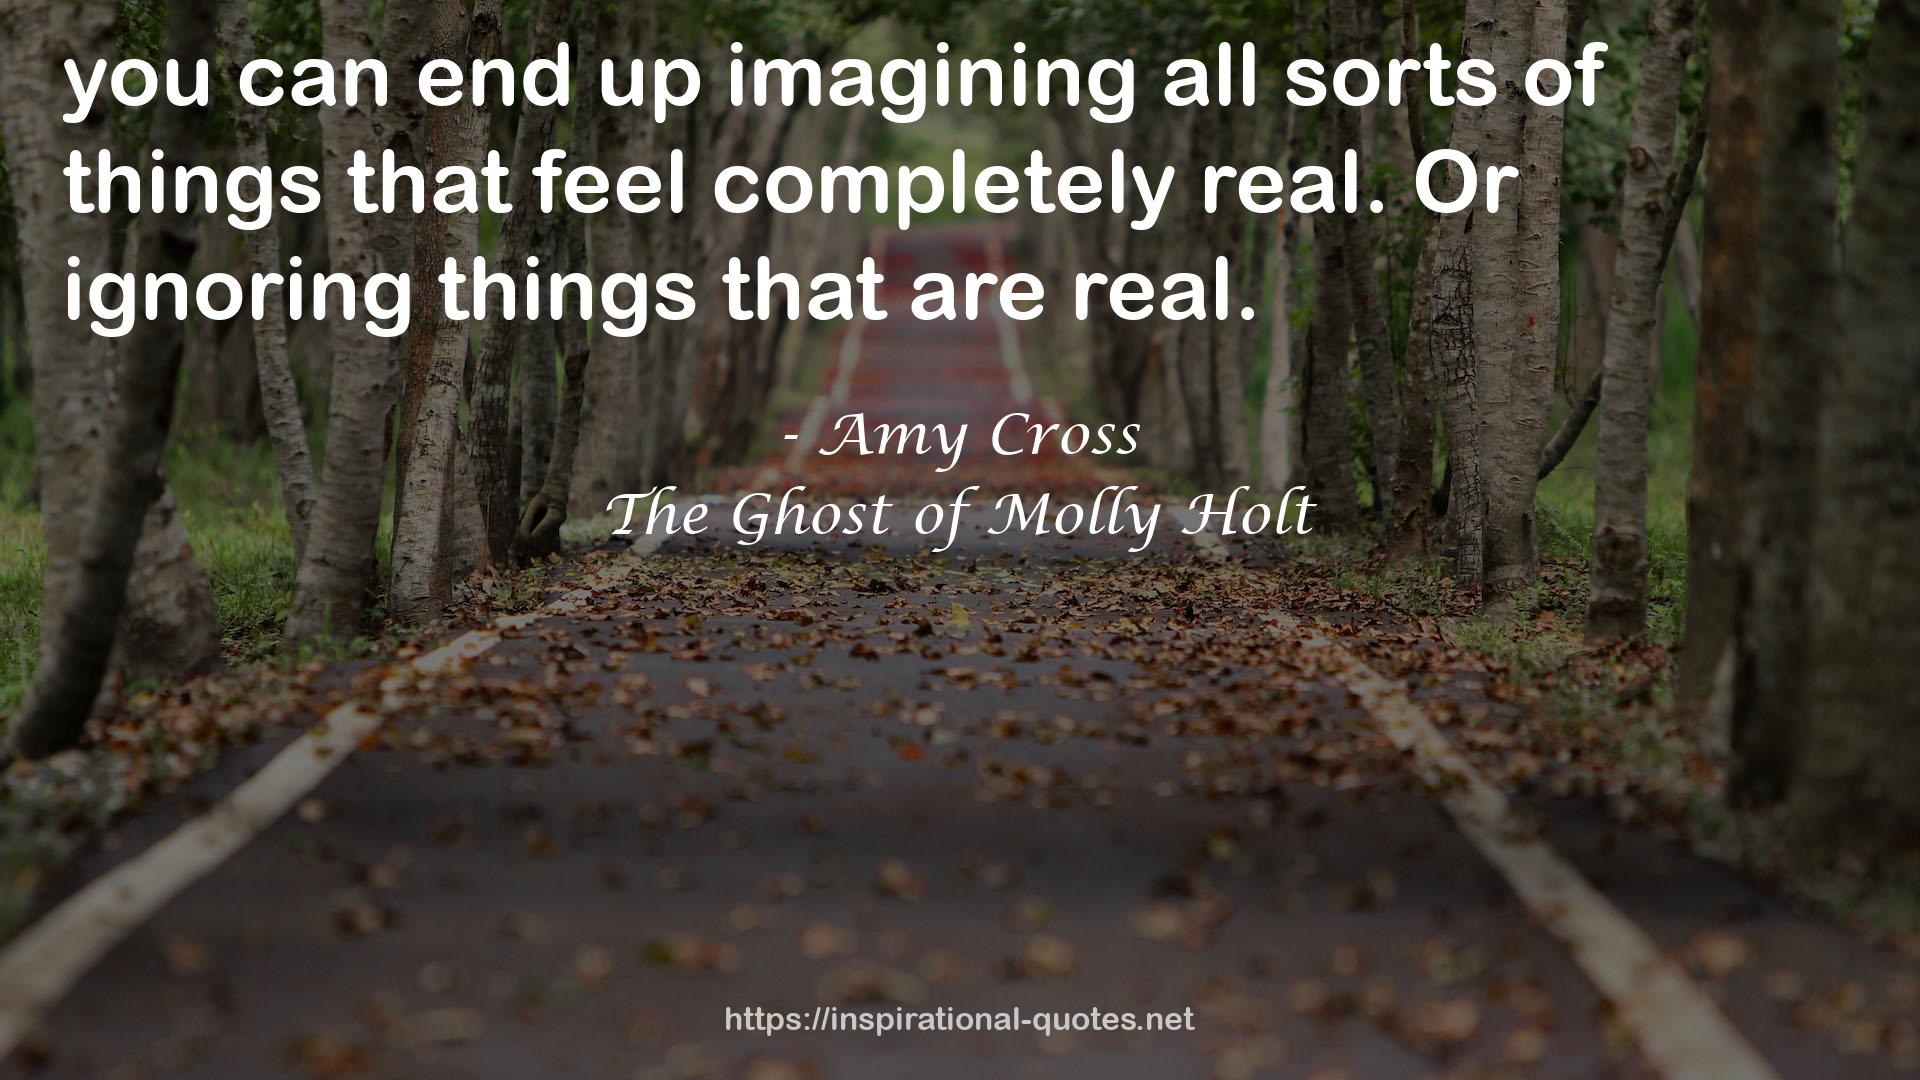 The Ghost of Molly Holt QUOTES